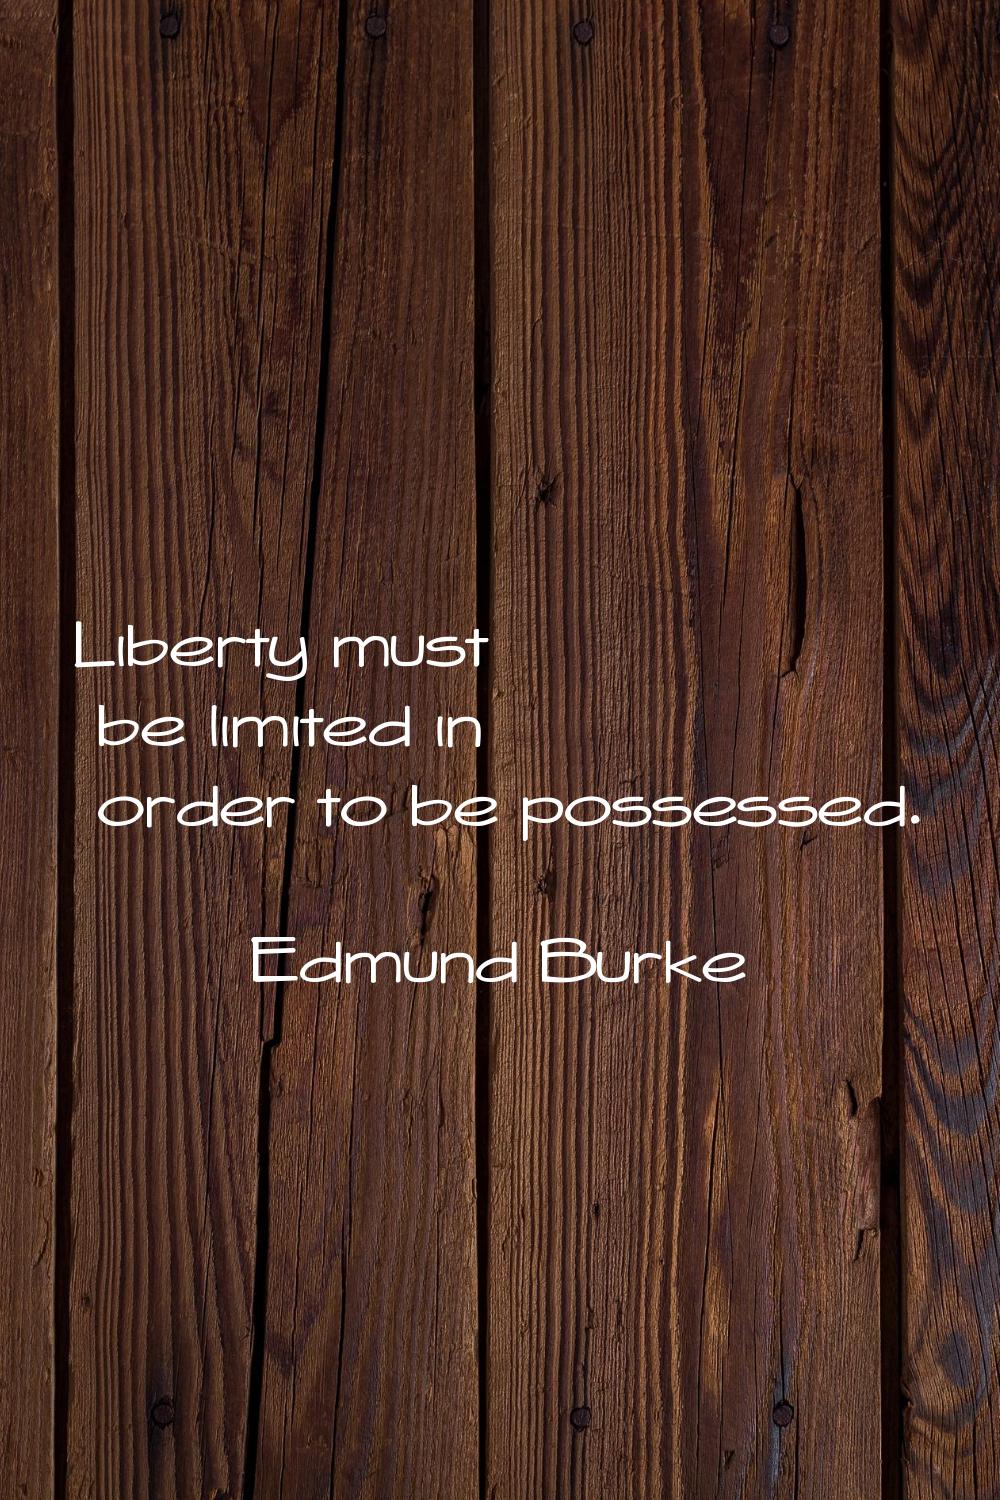 Liberty must be limited in order to be possessed.